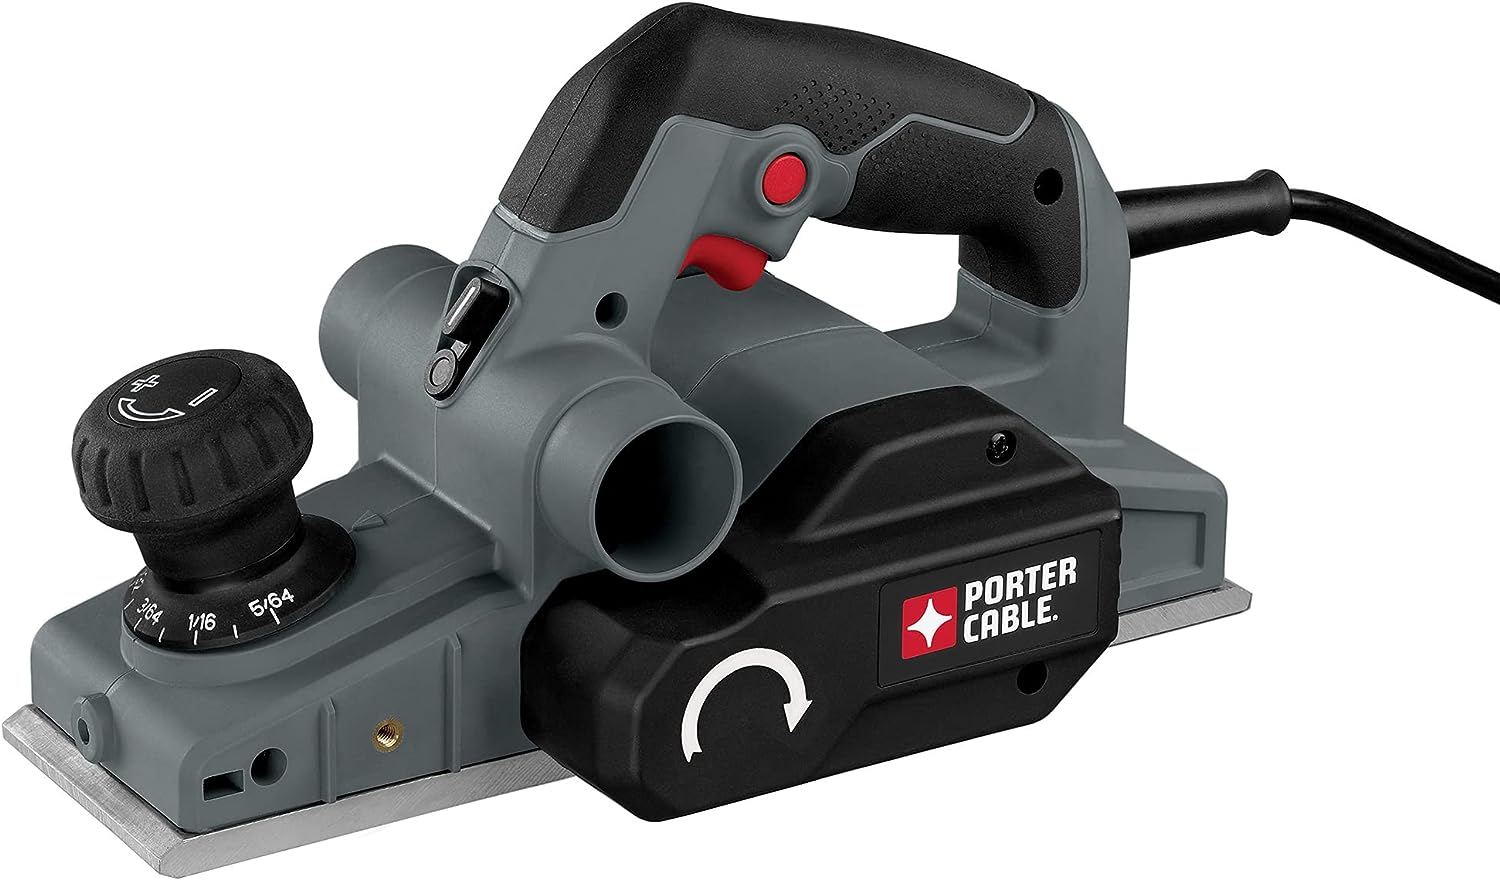 PORTER CABLE Hand Planer 6-Amp